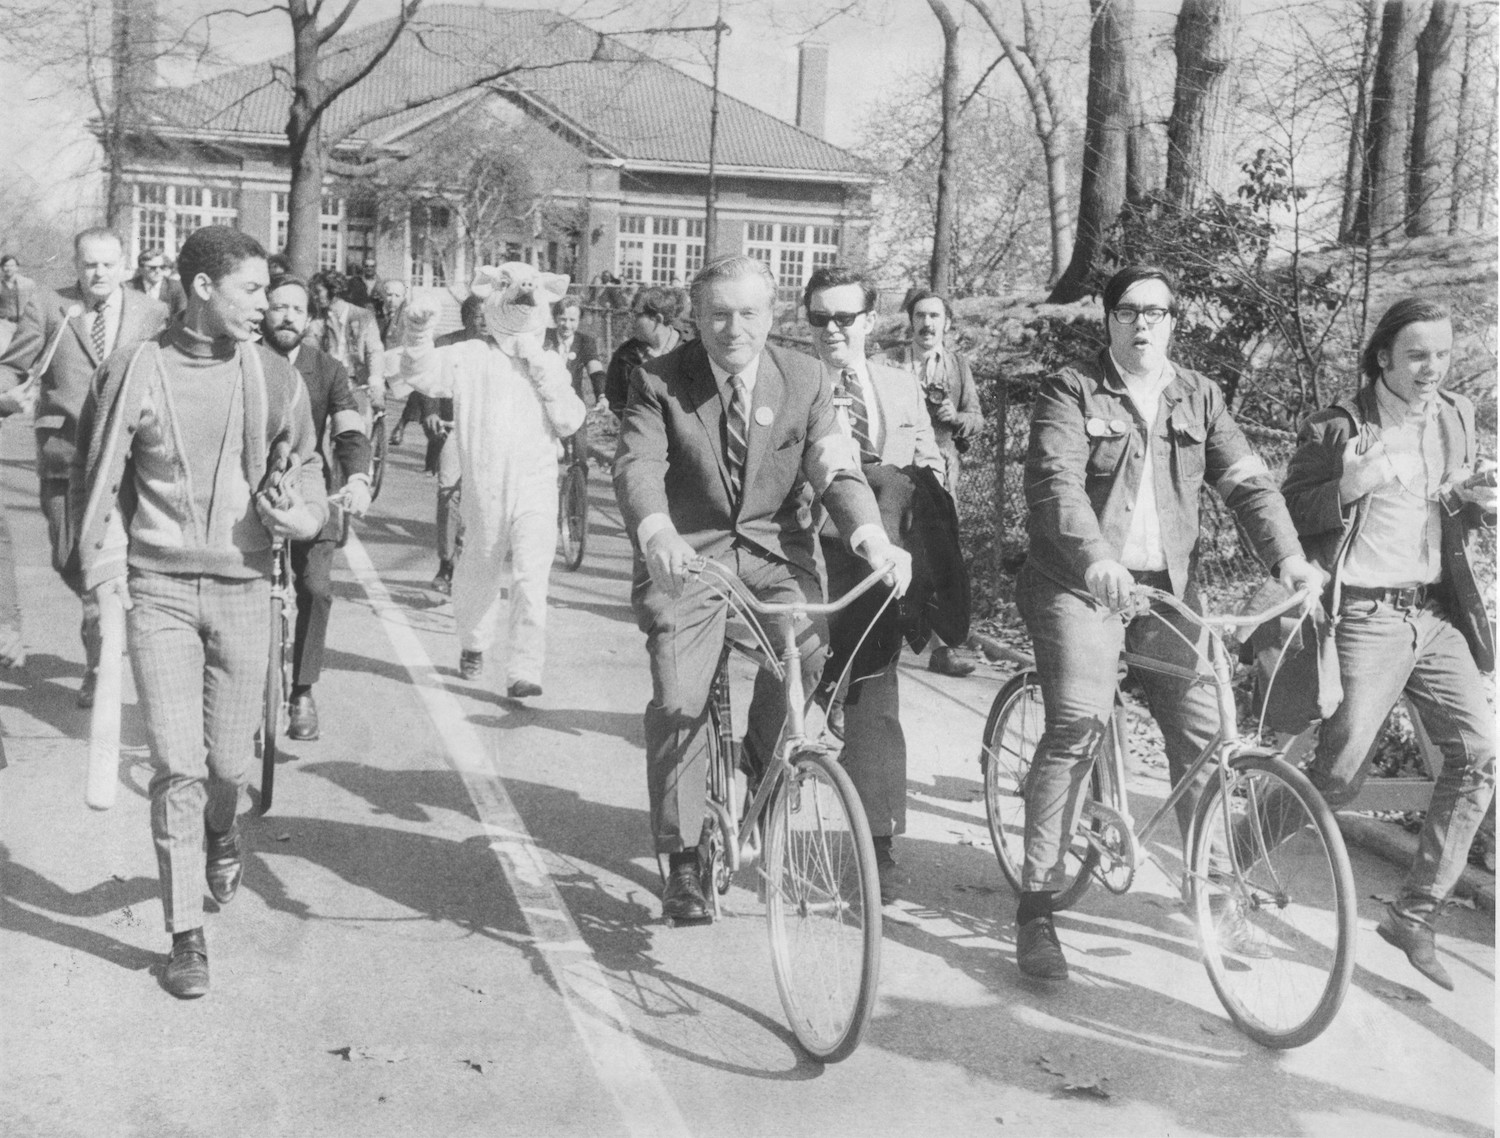 New York Governor Nelson A. Rockefeller rides a bike in Prospect Park, Brooklyn in observance of the first Earth Day. 